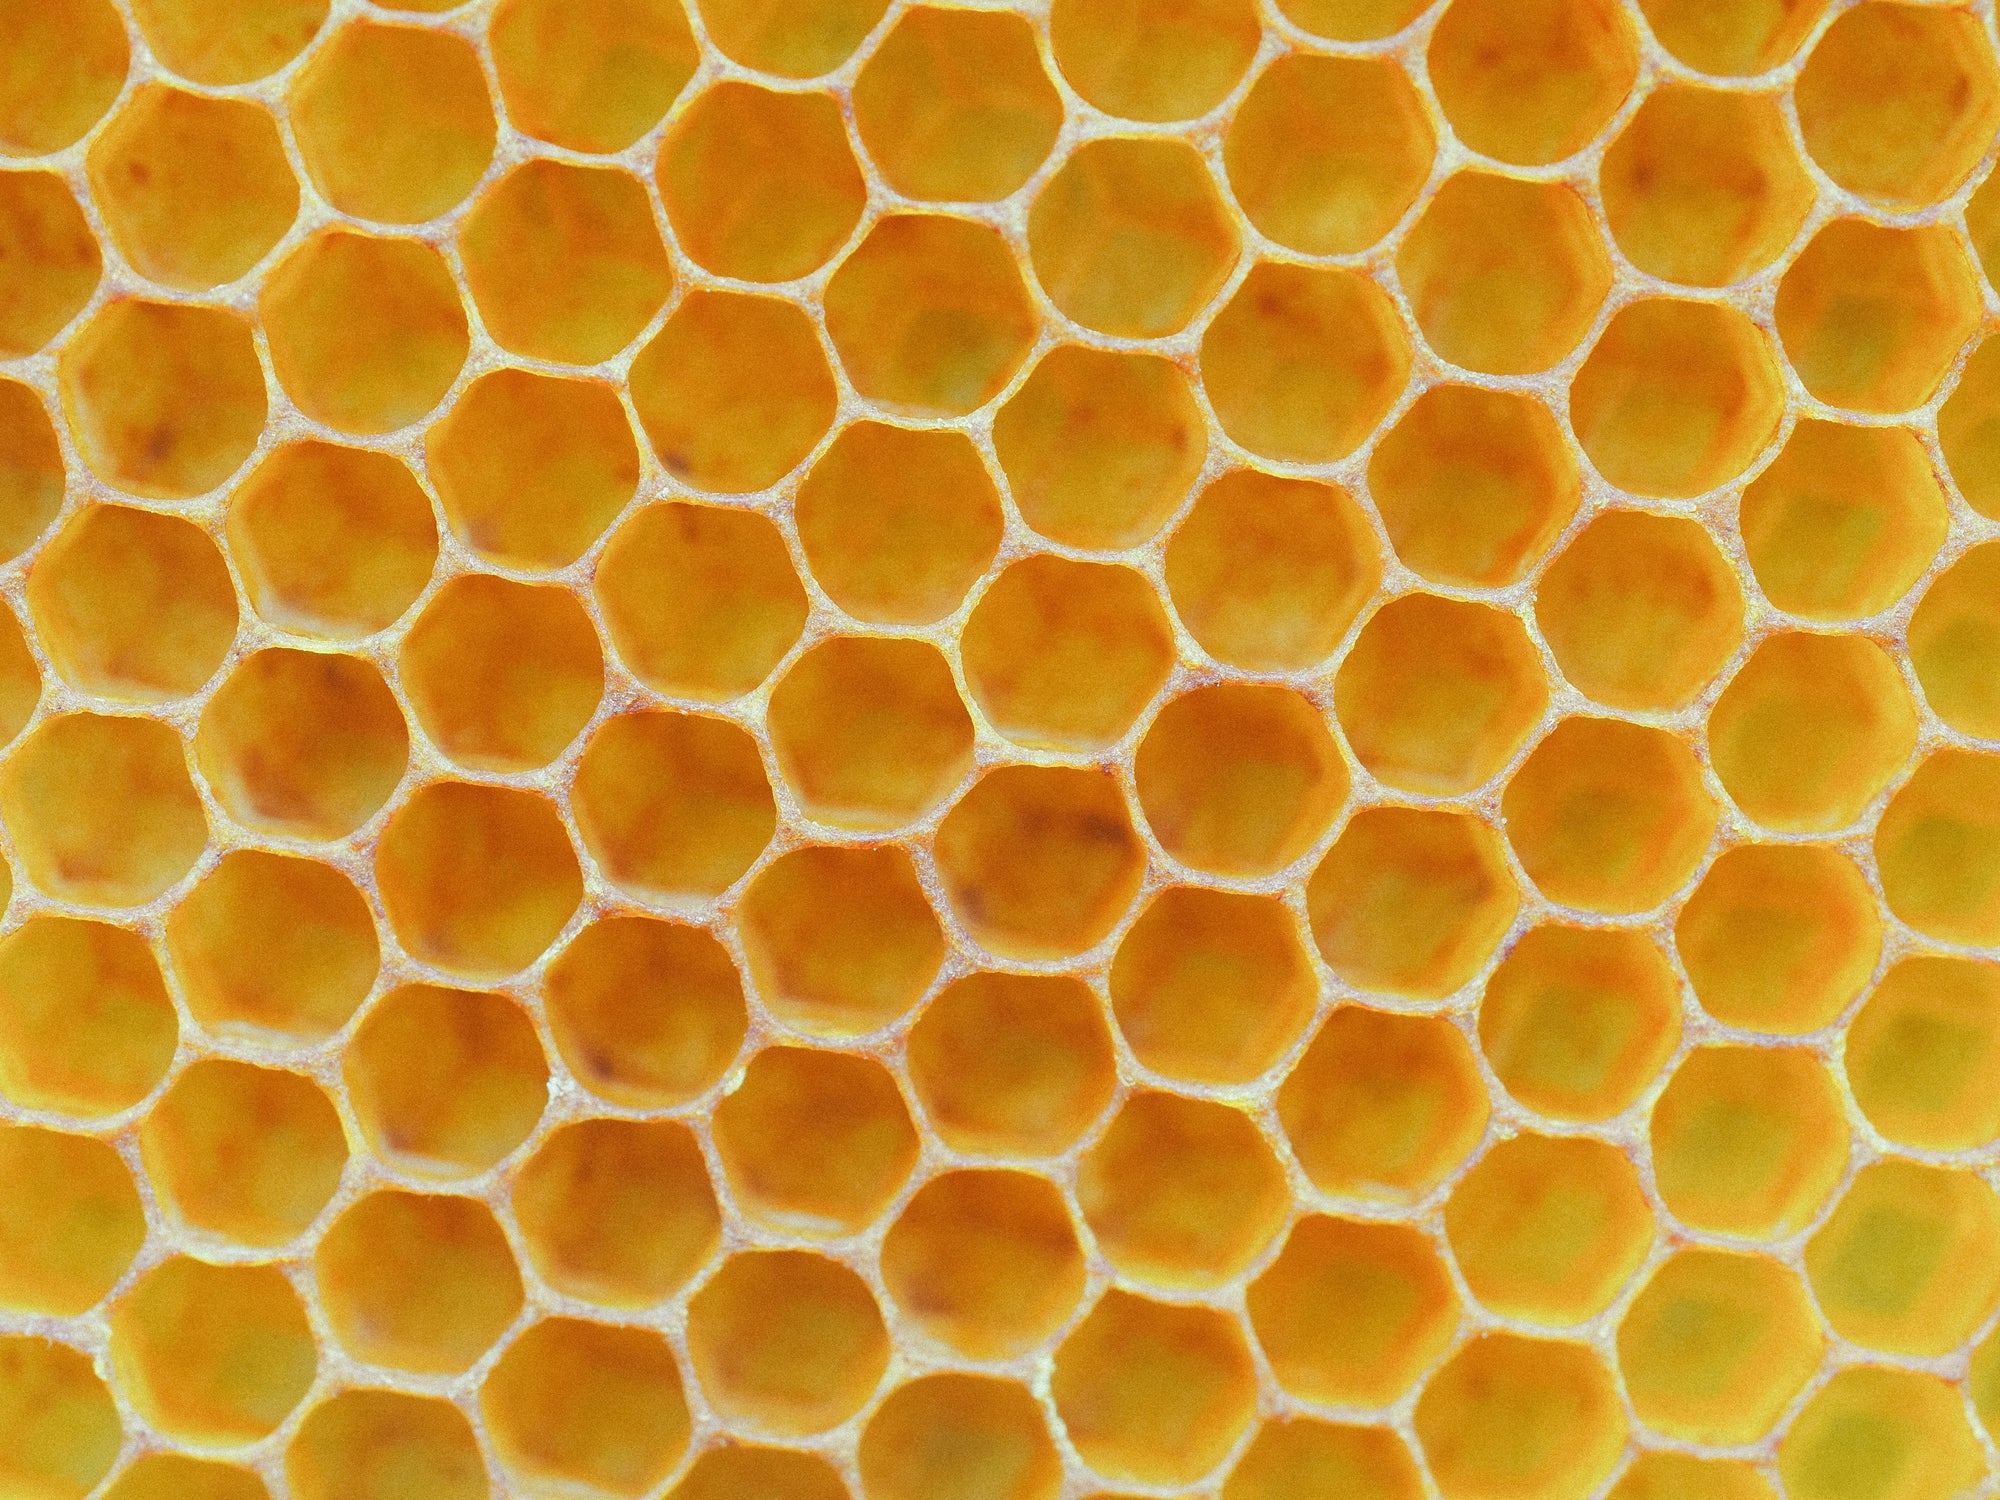 How Beeswax Helps Build the Protective Layers of Your Skin